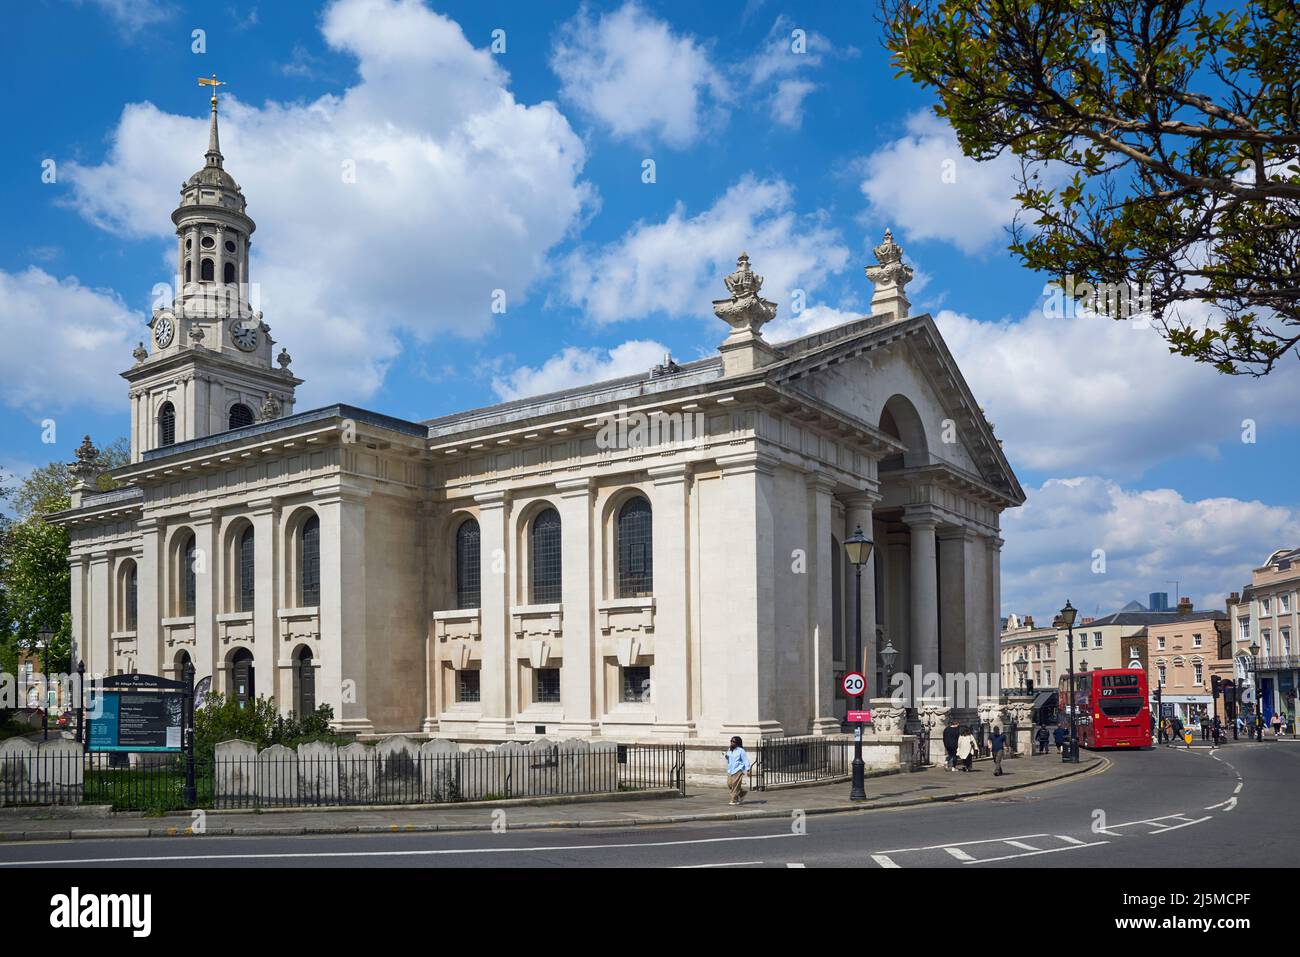 The 18th century church of St Alfege at Greenwich, South East London UK, built to the designs of Nicolas Hawksmoor Stock Photo